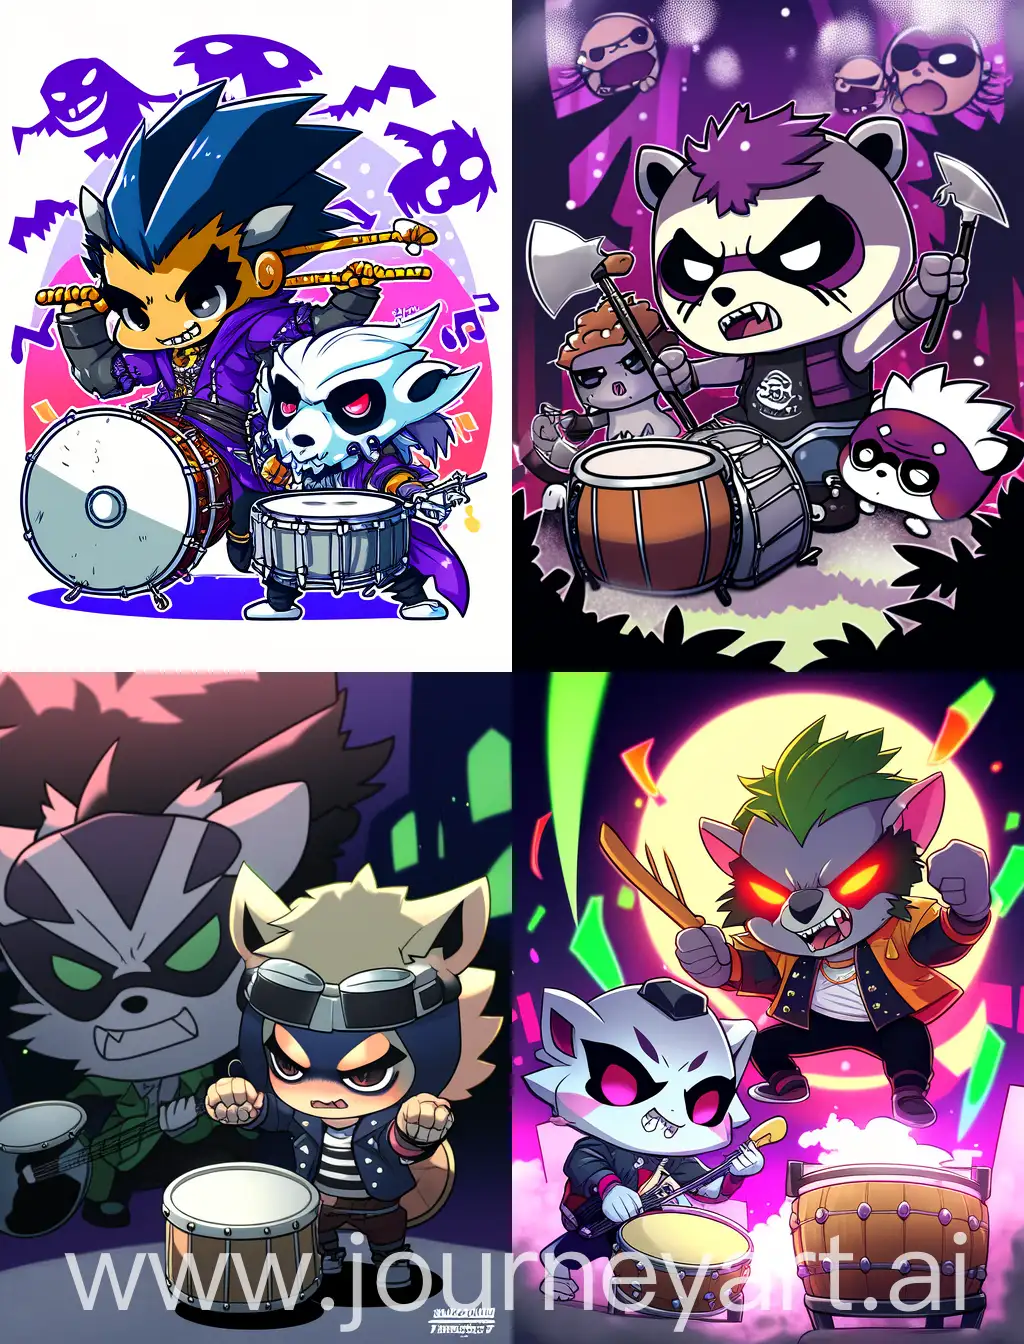 Chibi-Raccoon-and-Anime-Guy-Playing-Drums-in-Spooky-Setting